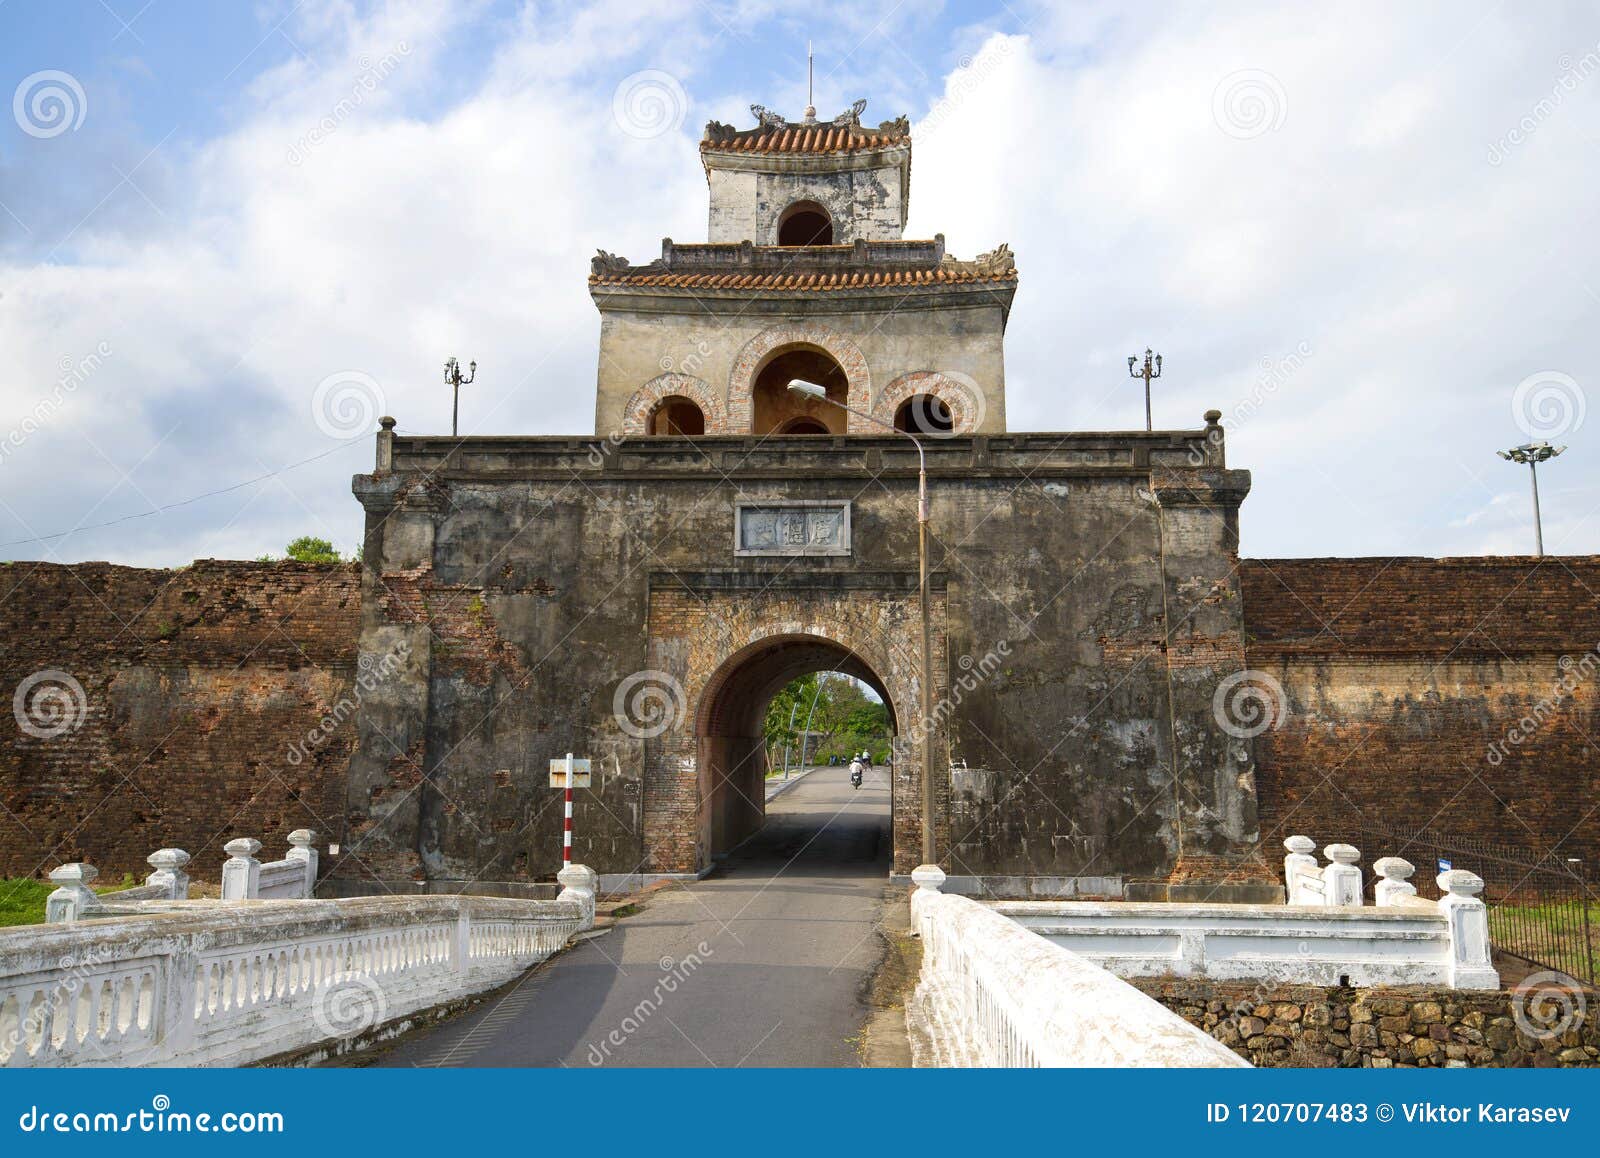 ancient serf bastion with gate. citadel cities of hue, vietnam